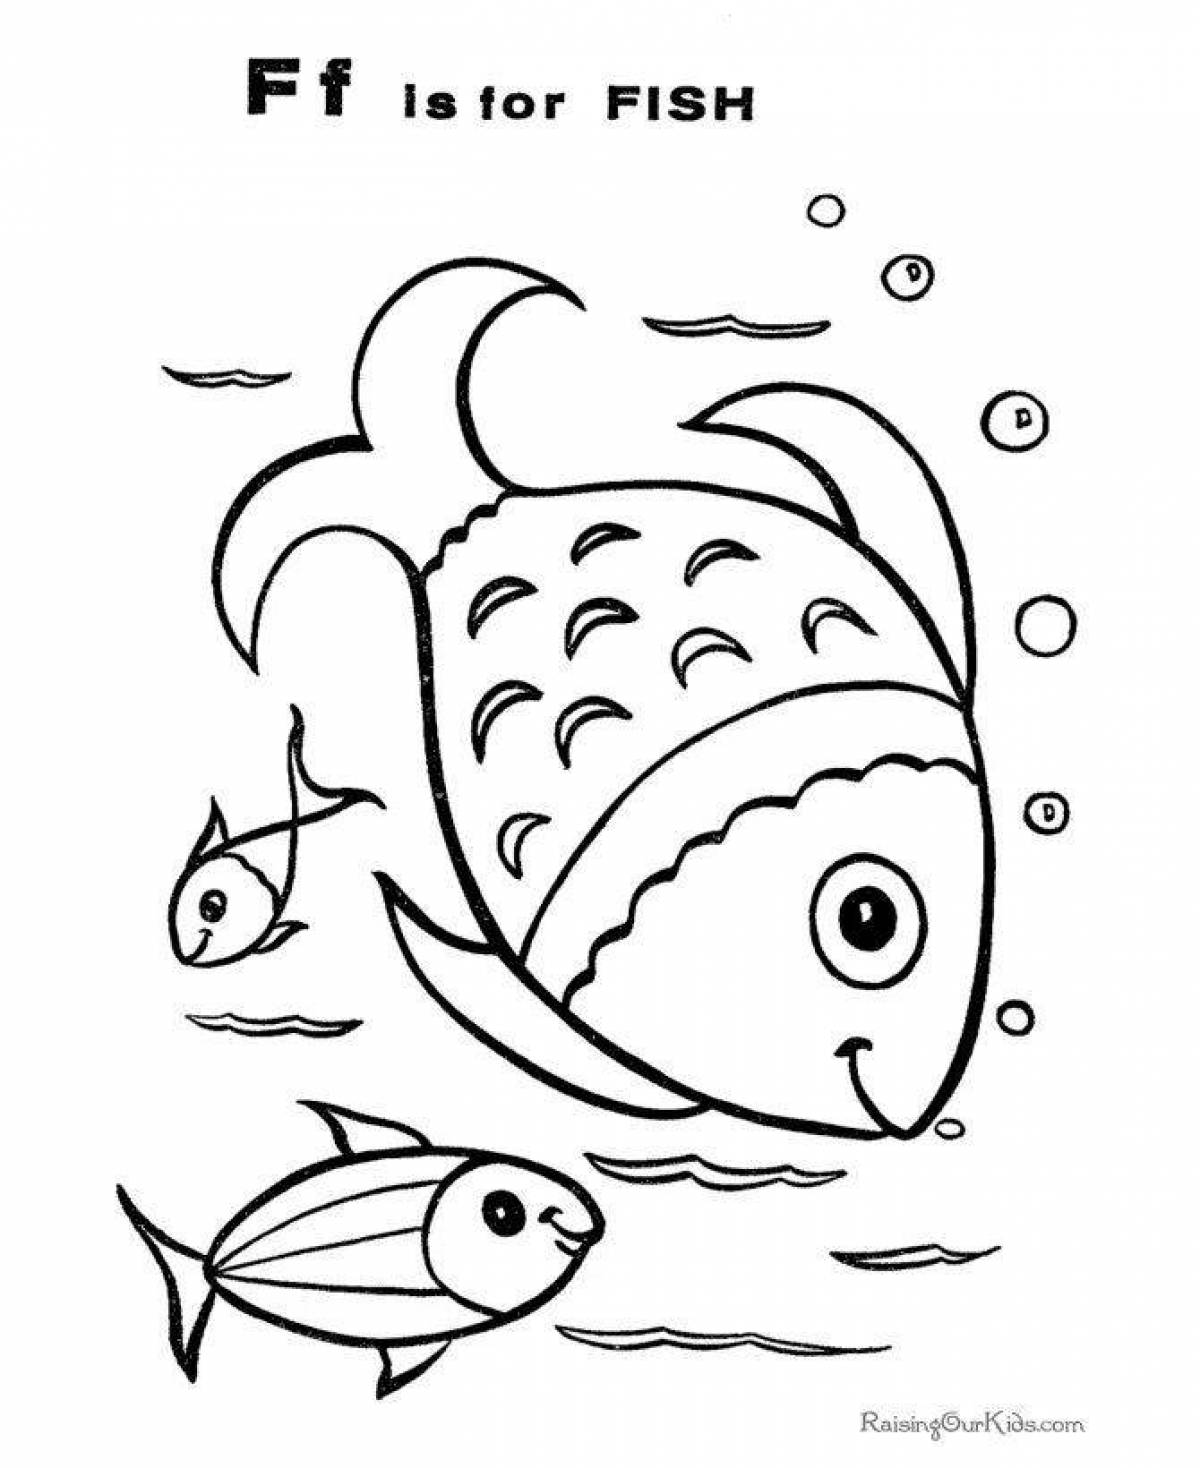 Fabulous fish coloring pages for 3-4 year olds